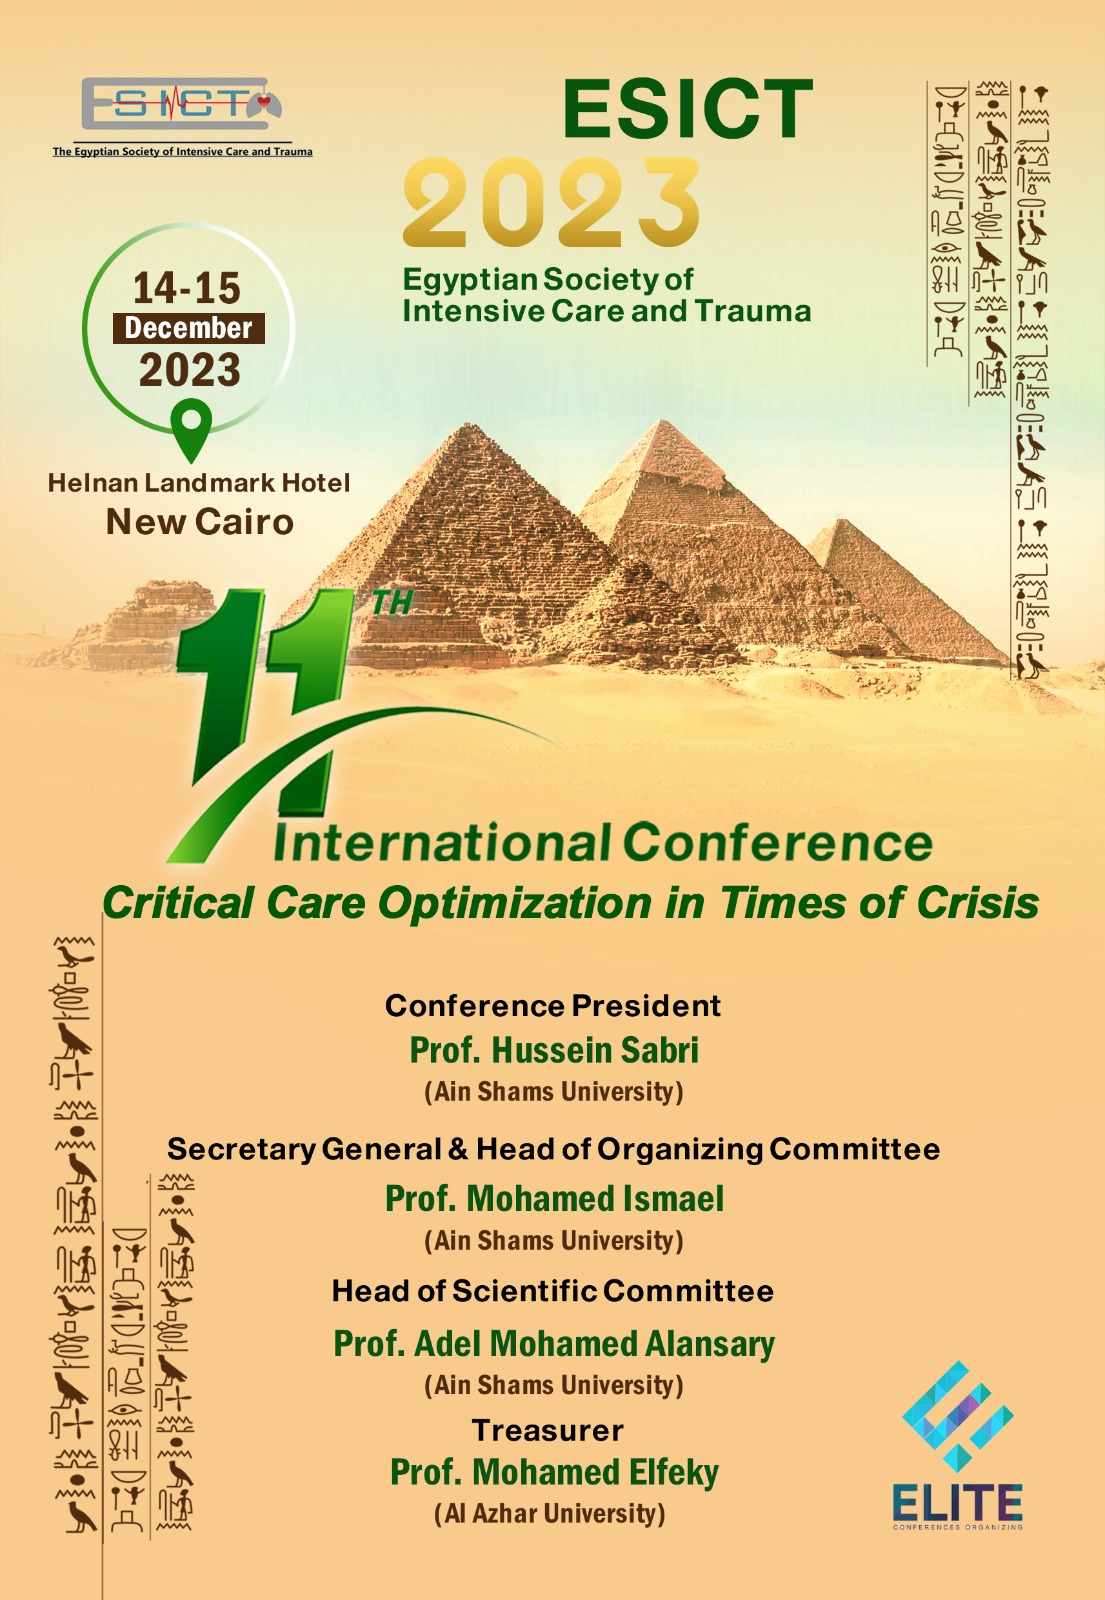 ESICT 2023 Egyptian Society of Intensive Care and Trauma